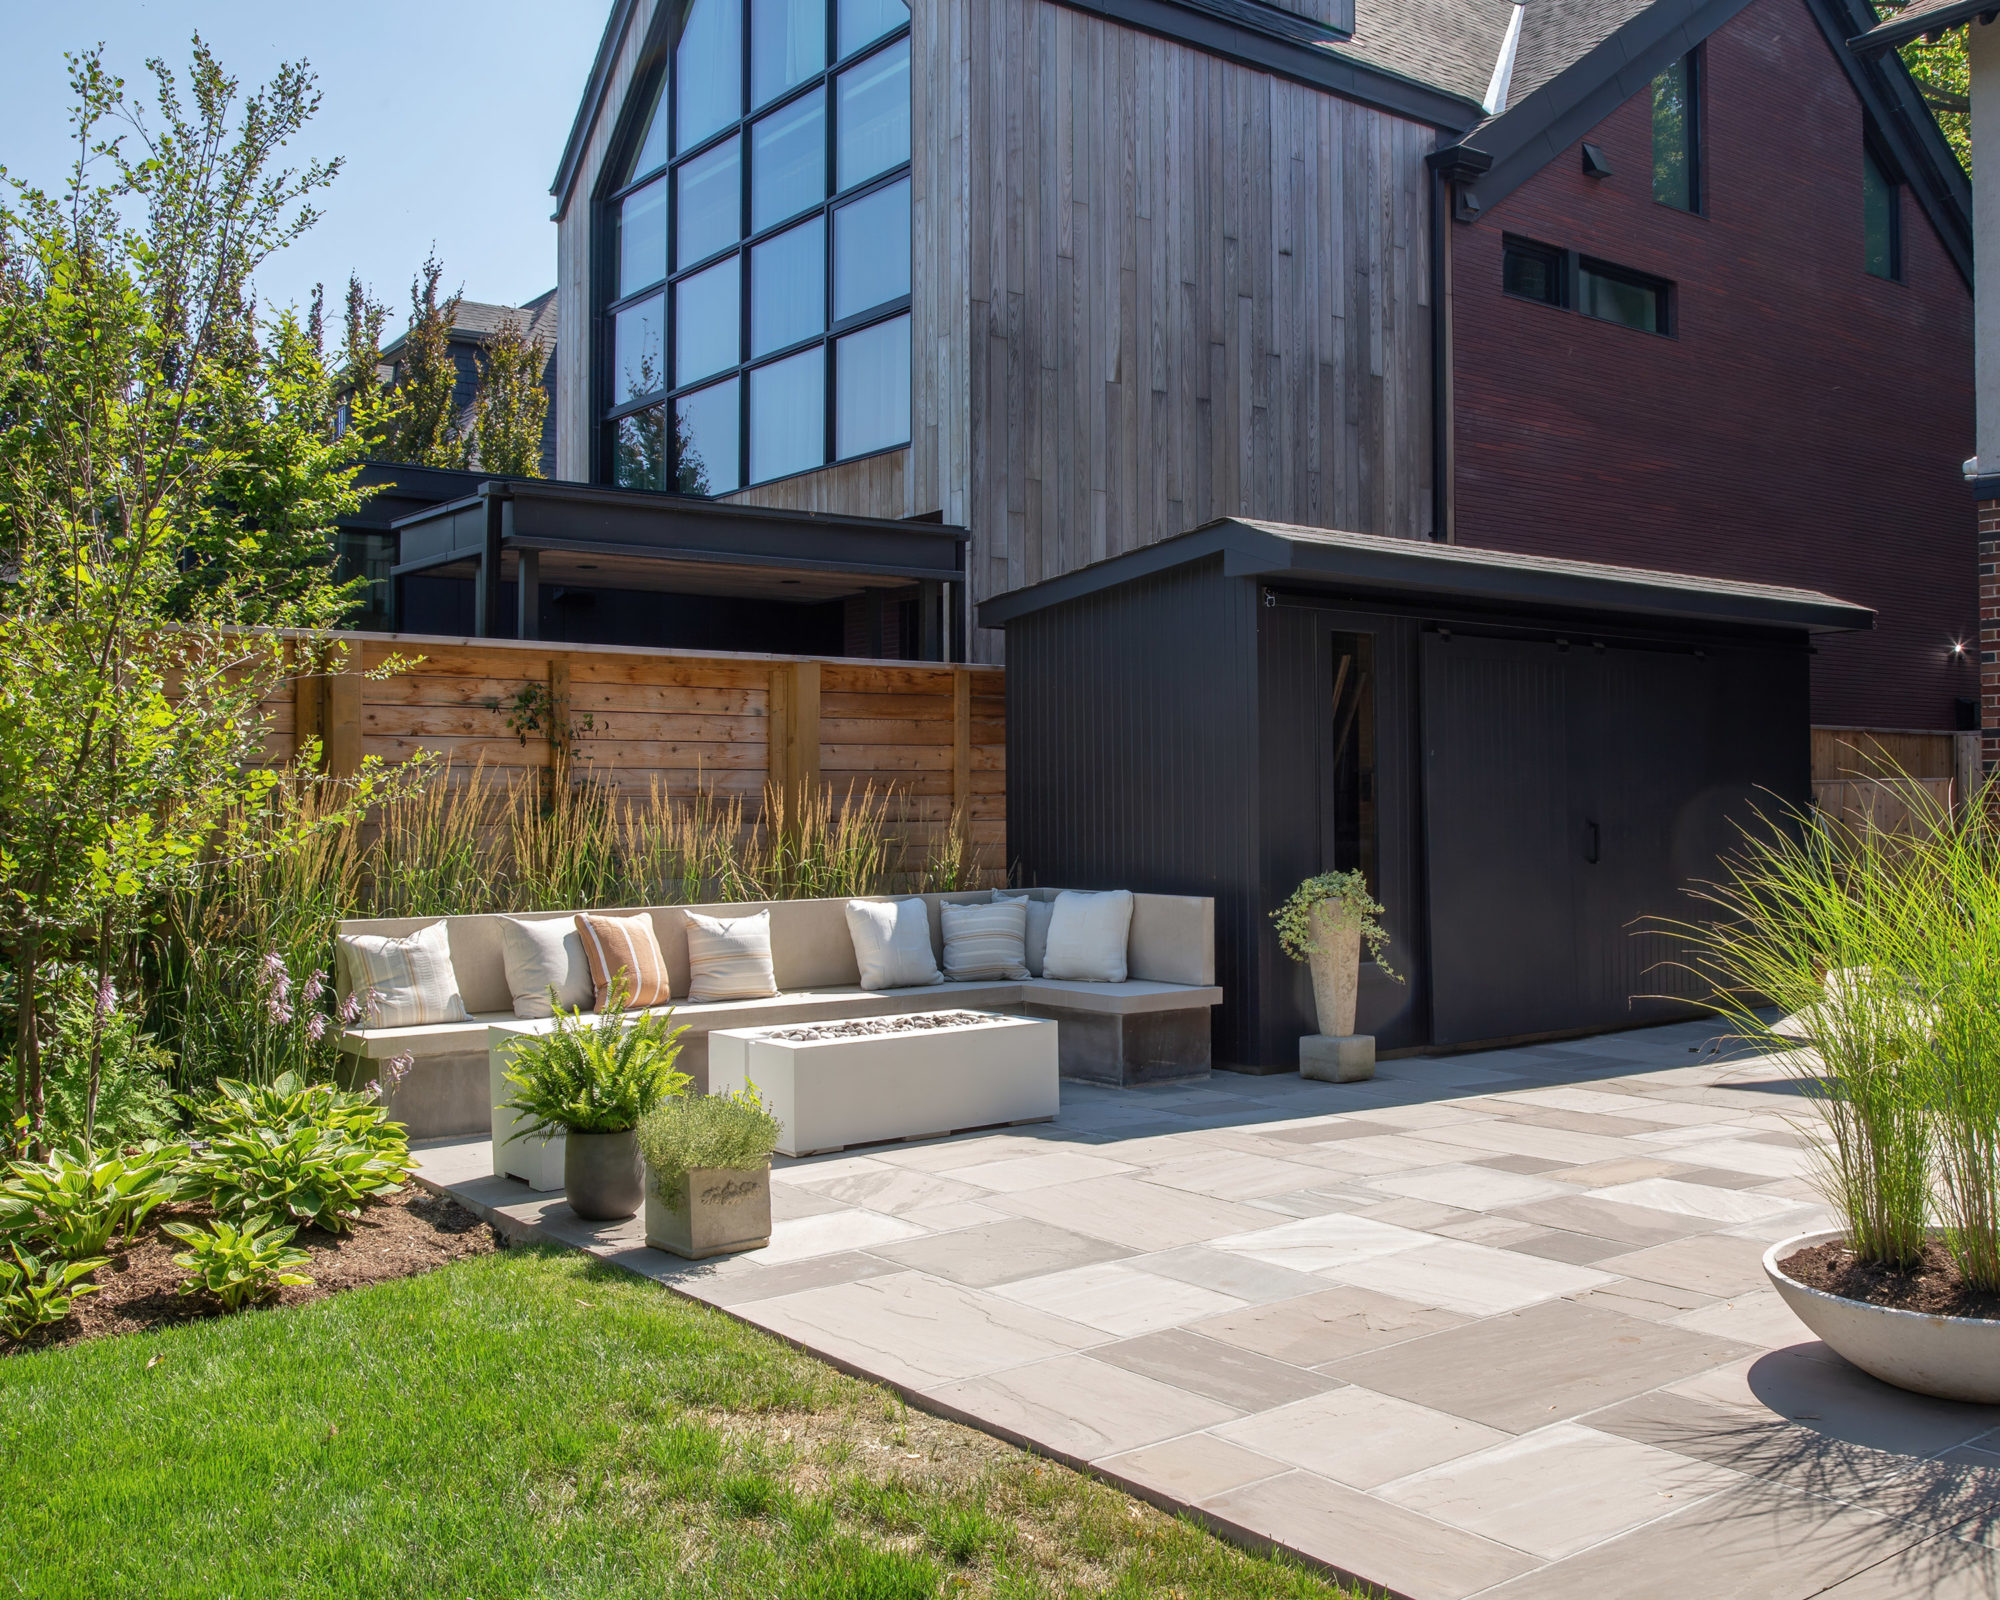 The new backyard: a water fountain, stone seating and a crisp patio. 